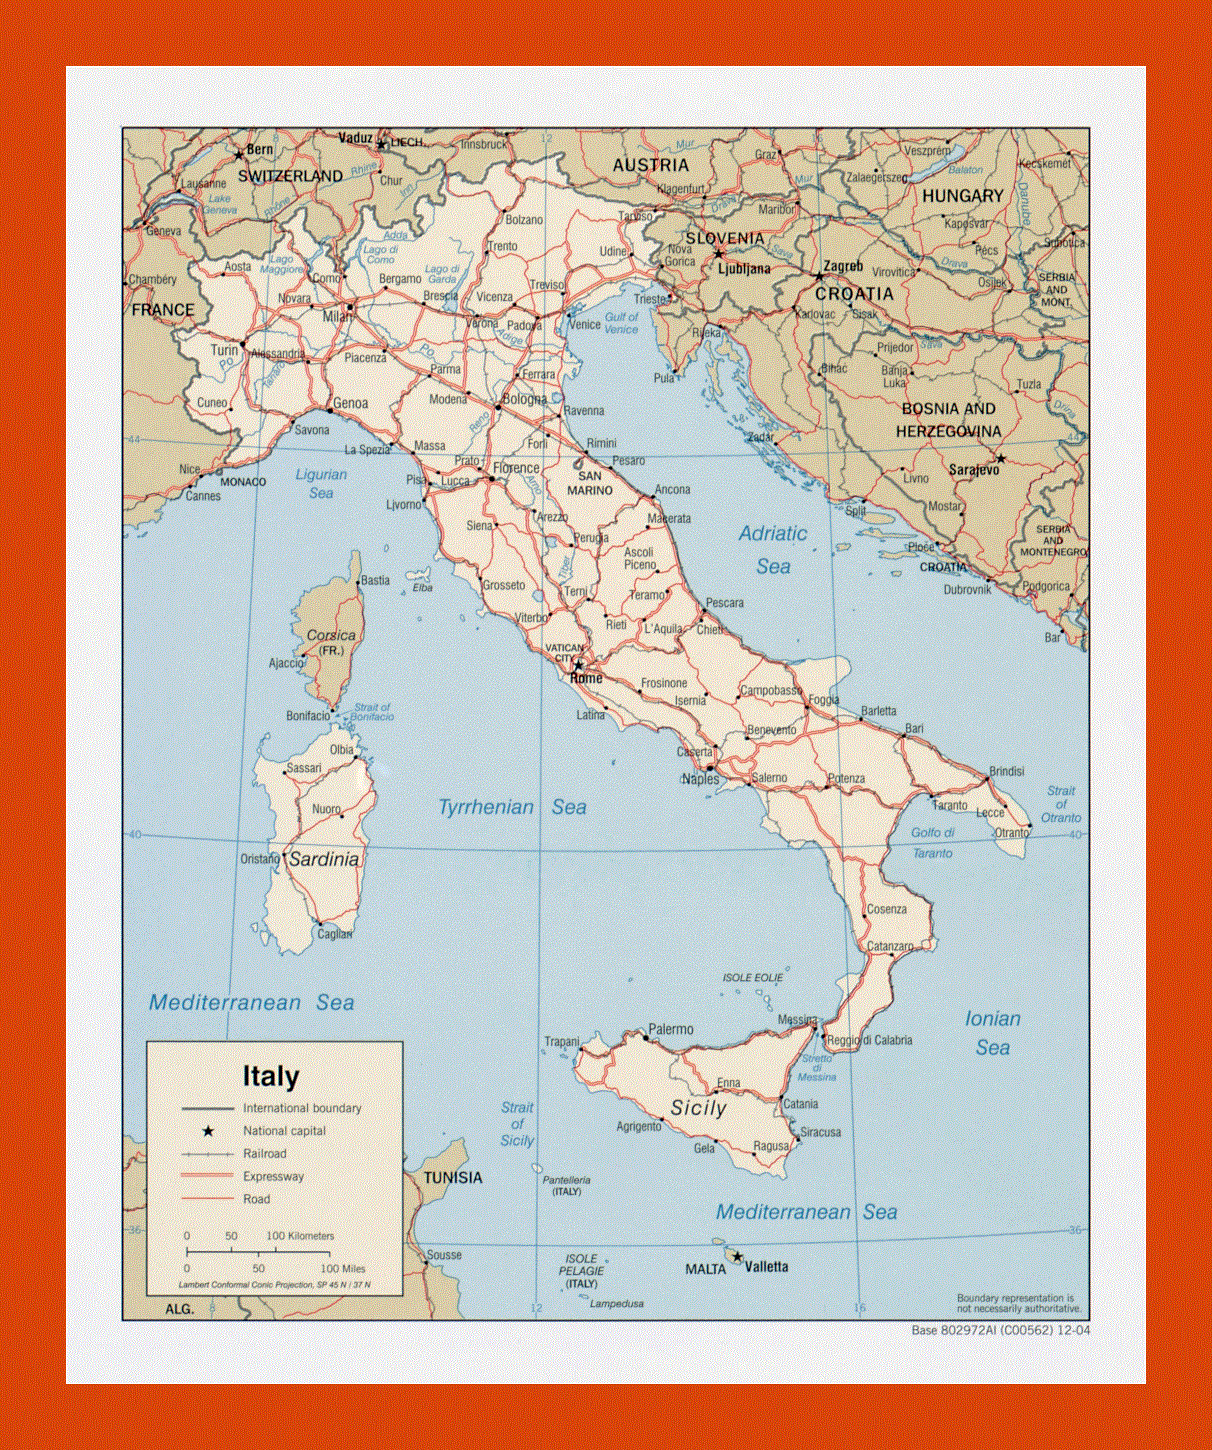 Political map of Italy - 2004